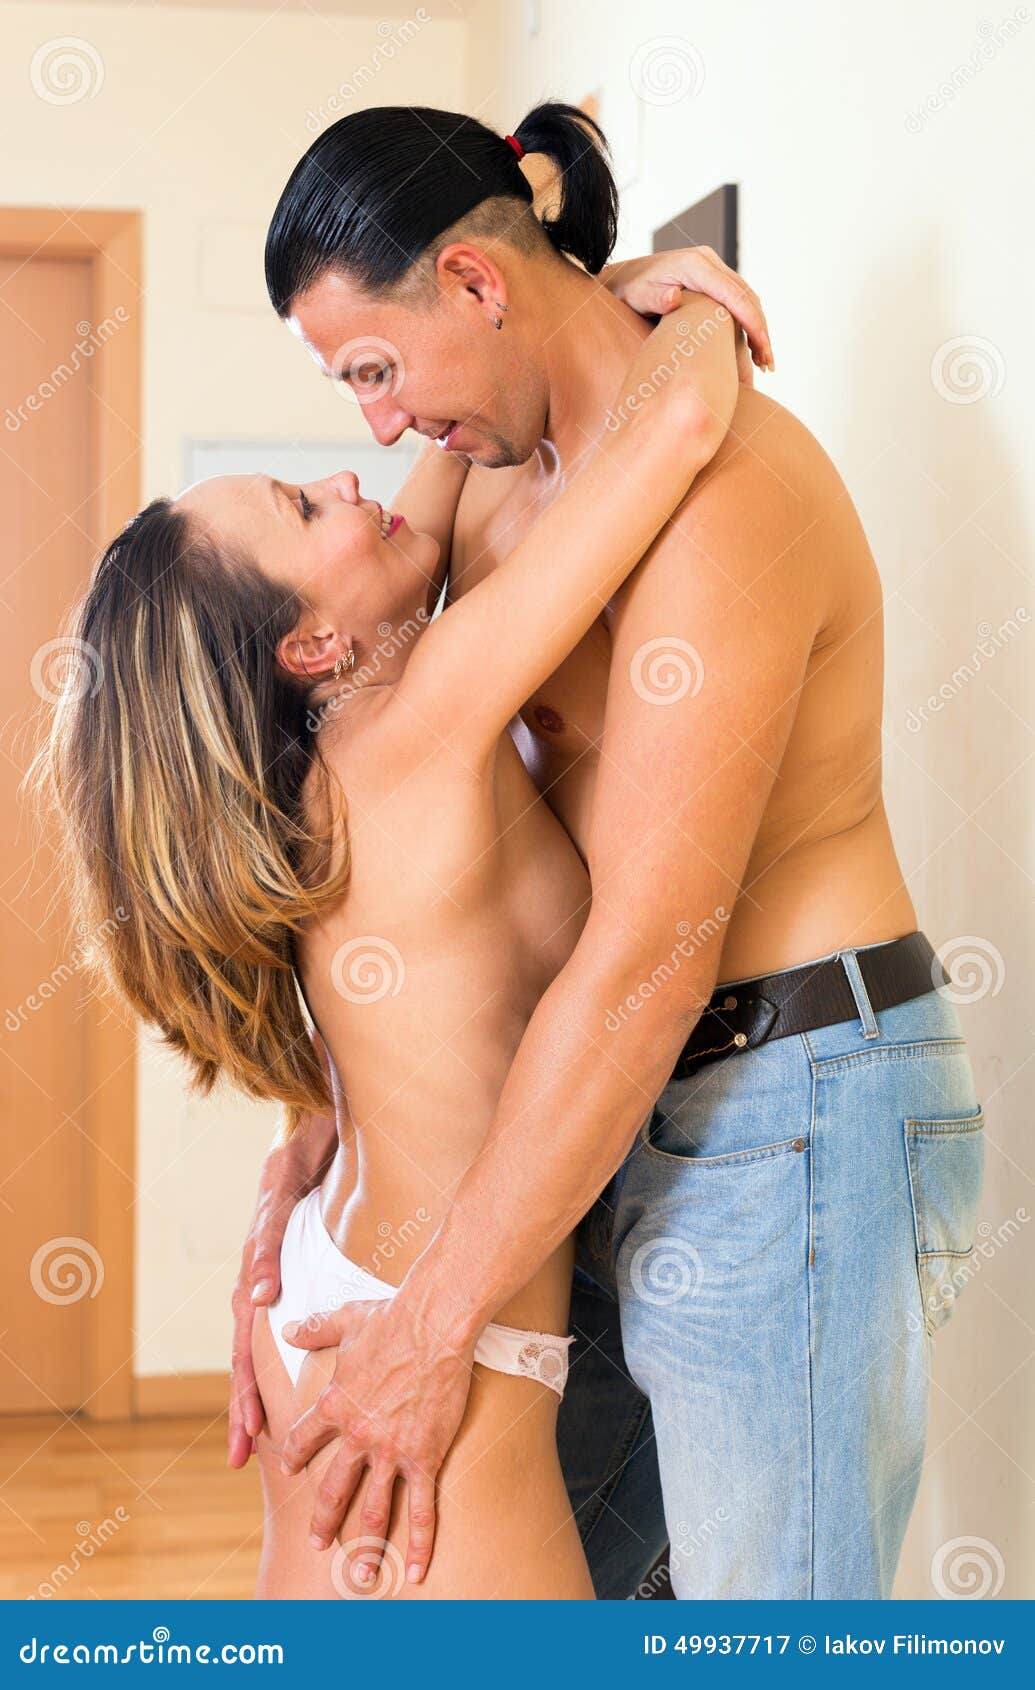 Sex adult picture